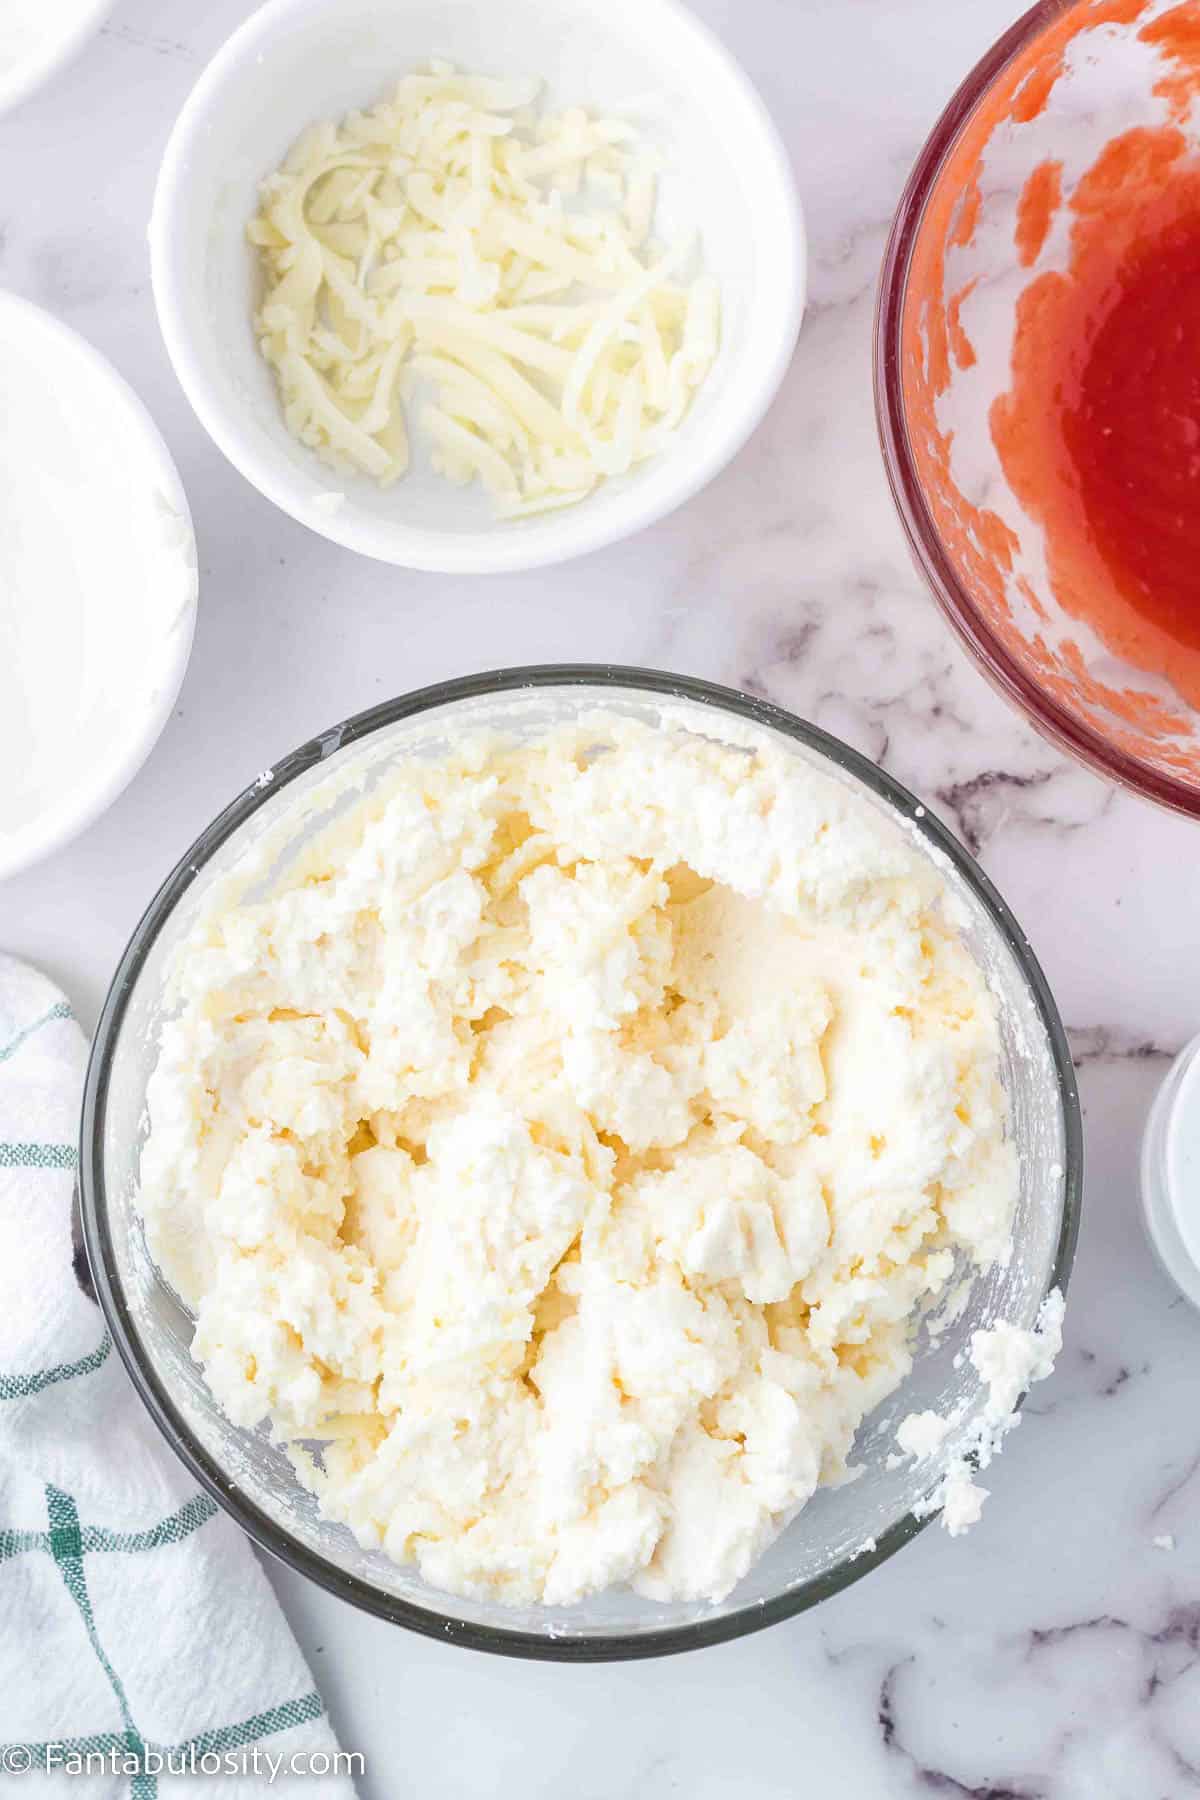 Mixed ricotta and cheeses in clear glass bowl.